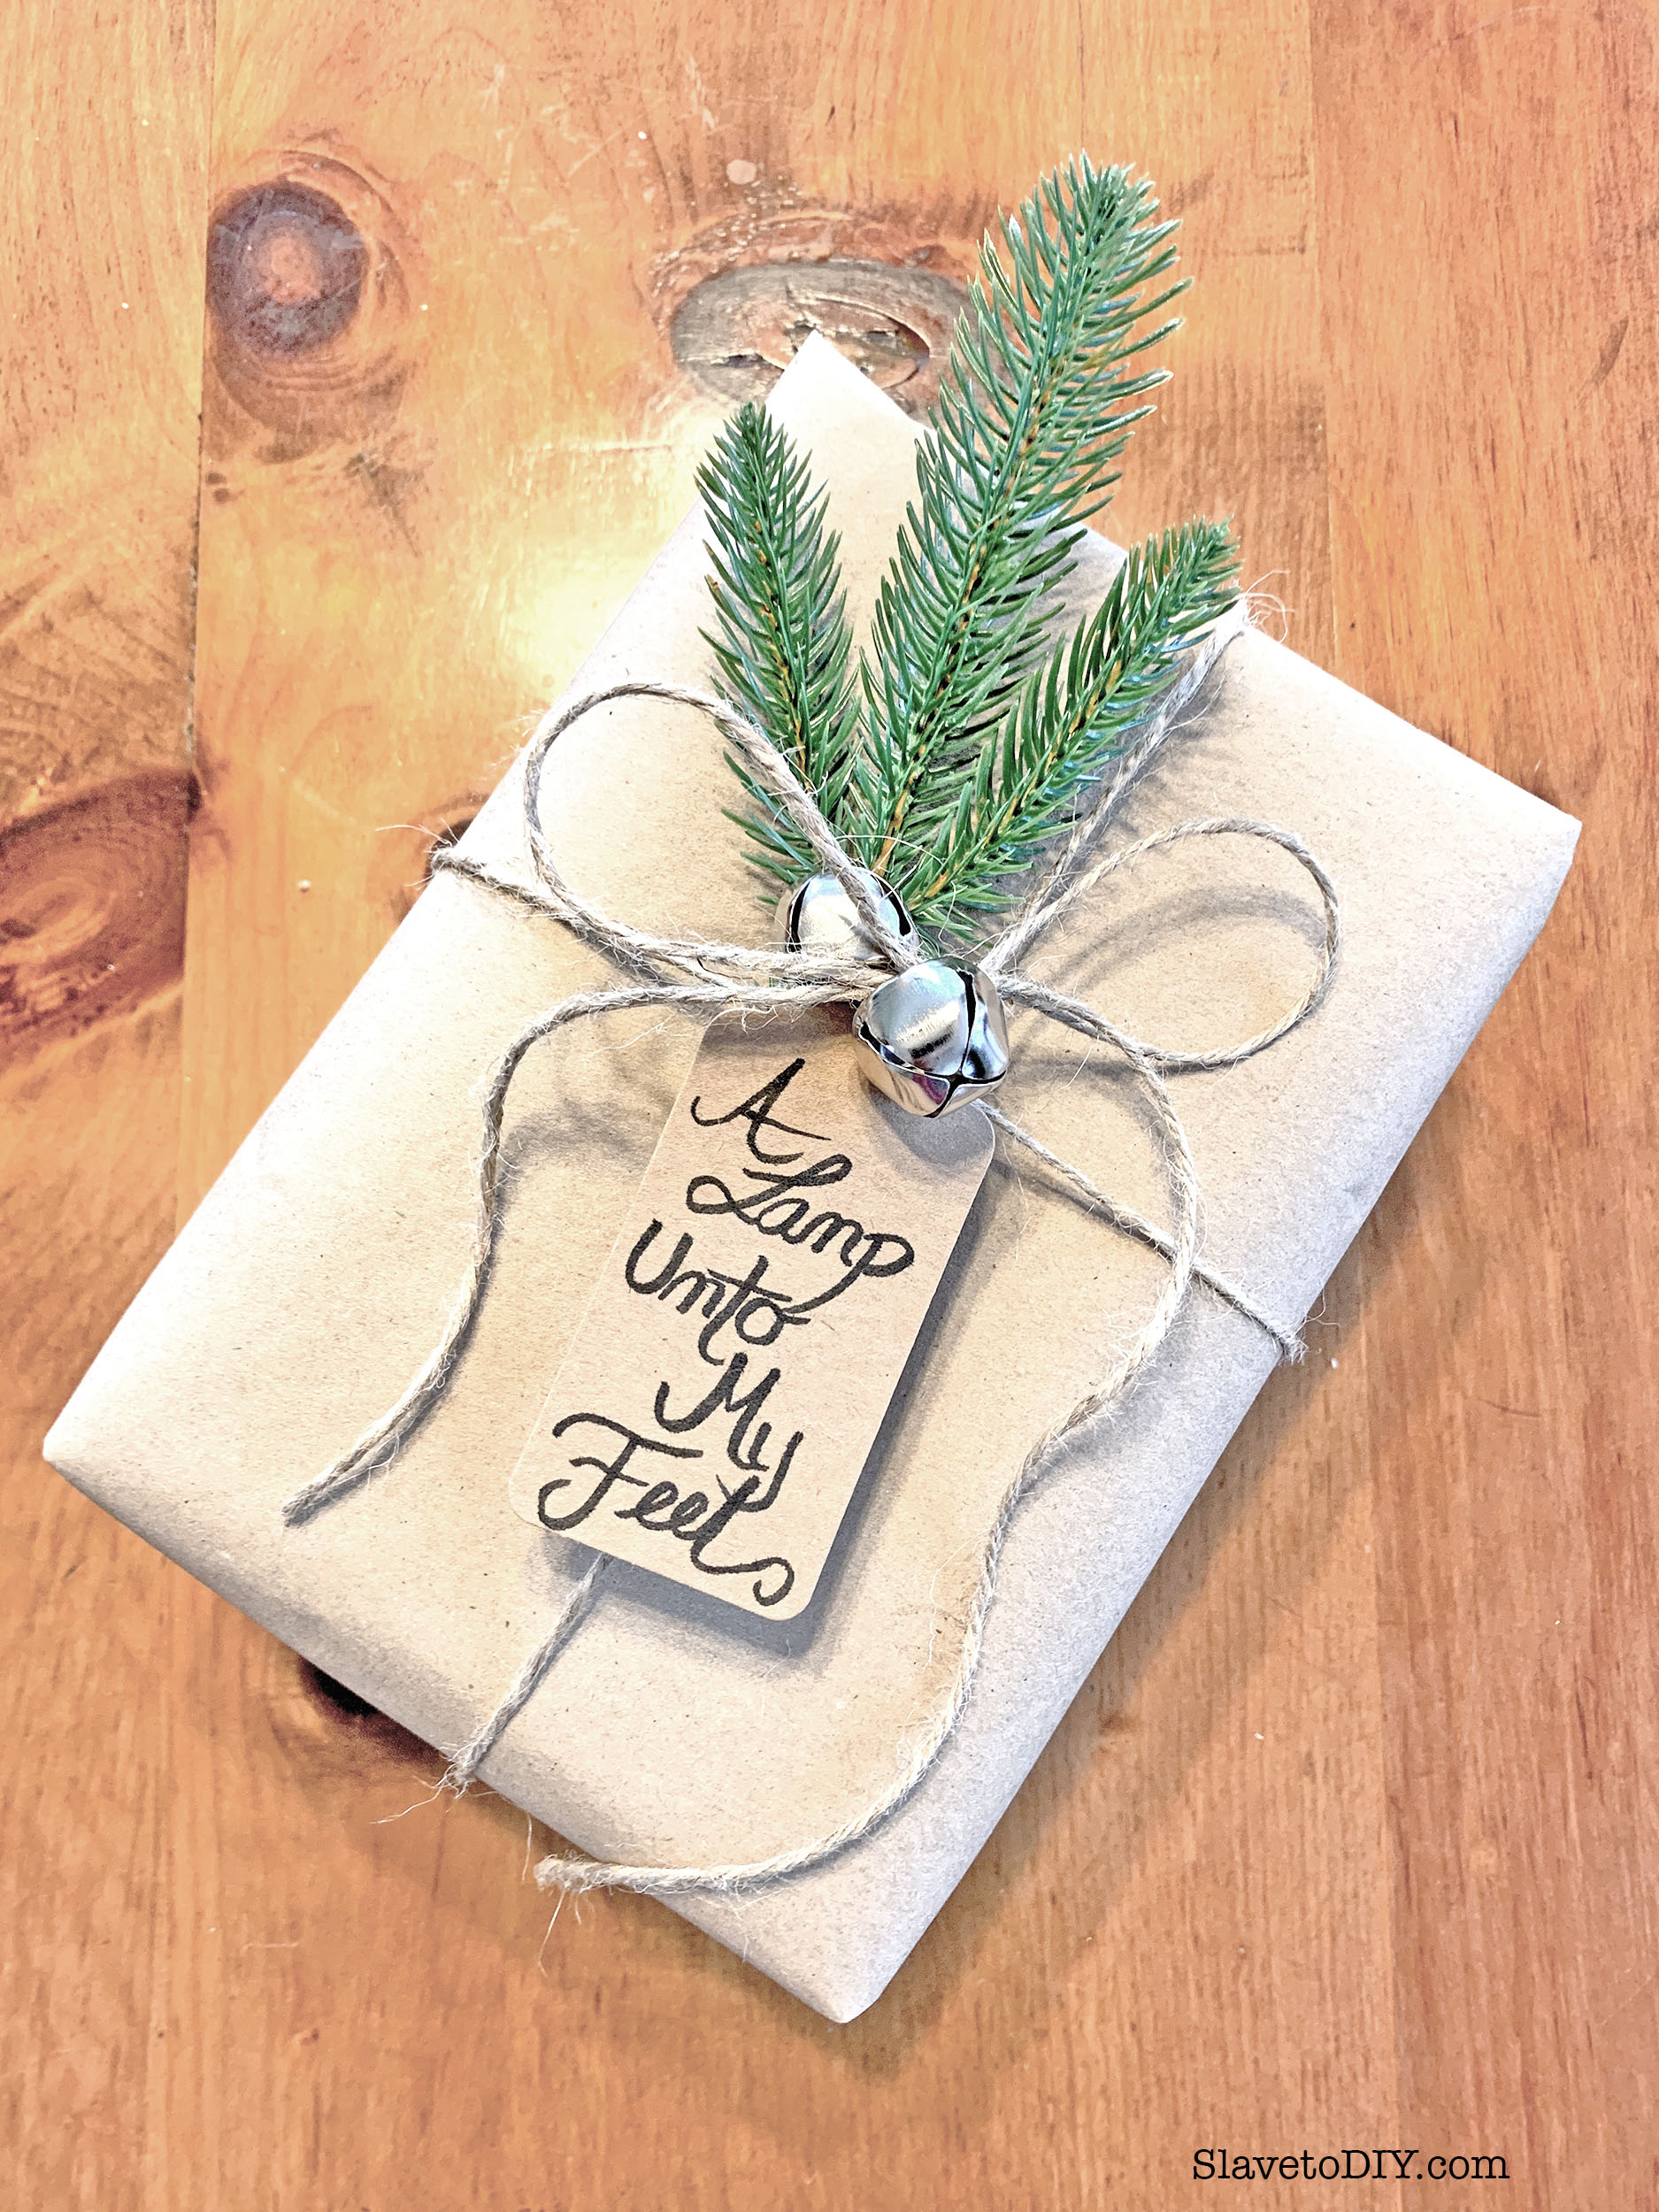 How To Do Classic Christmas Gift Wrap For $1 Per Package